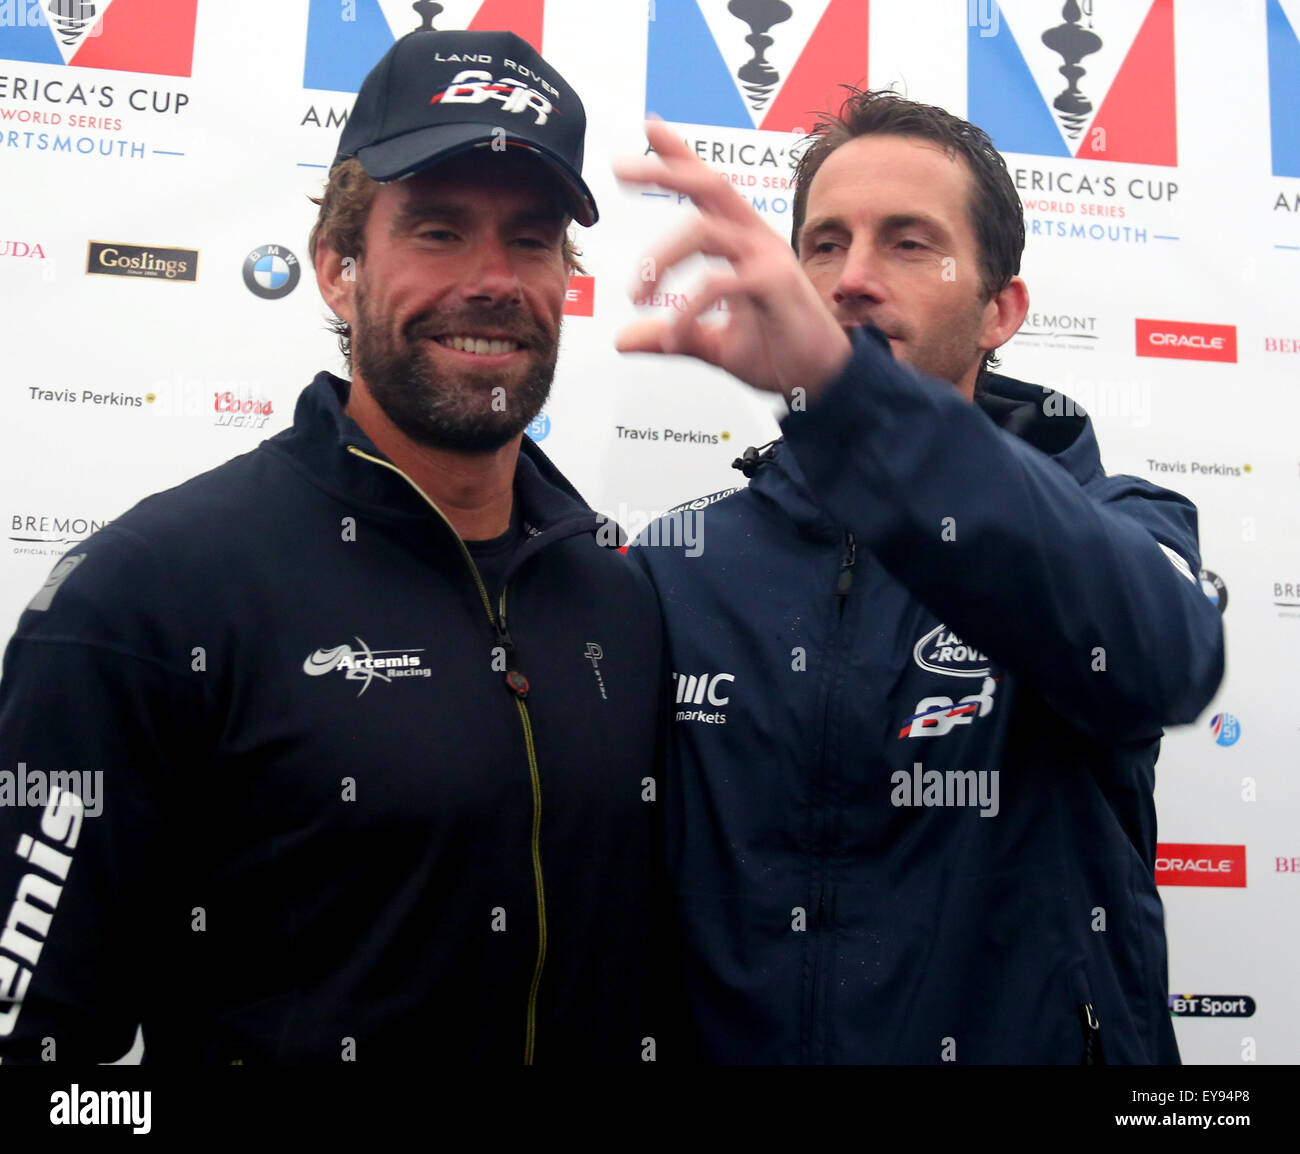 Southsea,Hampshire Friday 24  July 2015.   America Cup on Southsea Common Artemis Racing Skipper: Nathan Outteridge ,BAR – Ben Ainslie Racing   Ben Puts a BAR Landrover hat on Nathan  Daily Press conference   © uknip/ Alamy Live News Credit:  uknip/ Alamy Live News Stock Photo